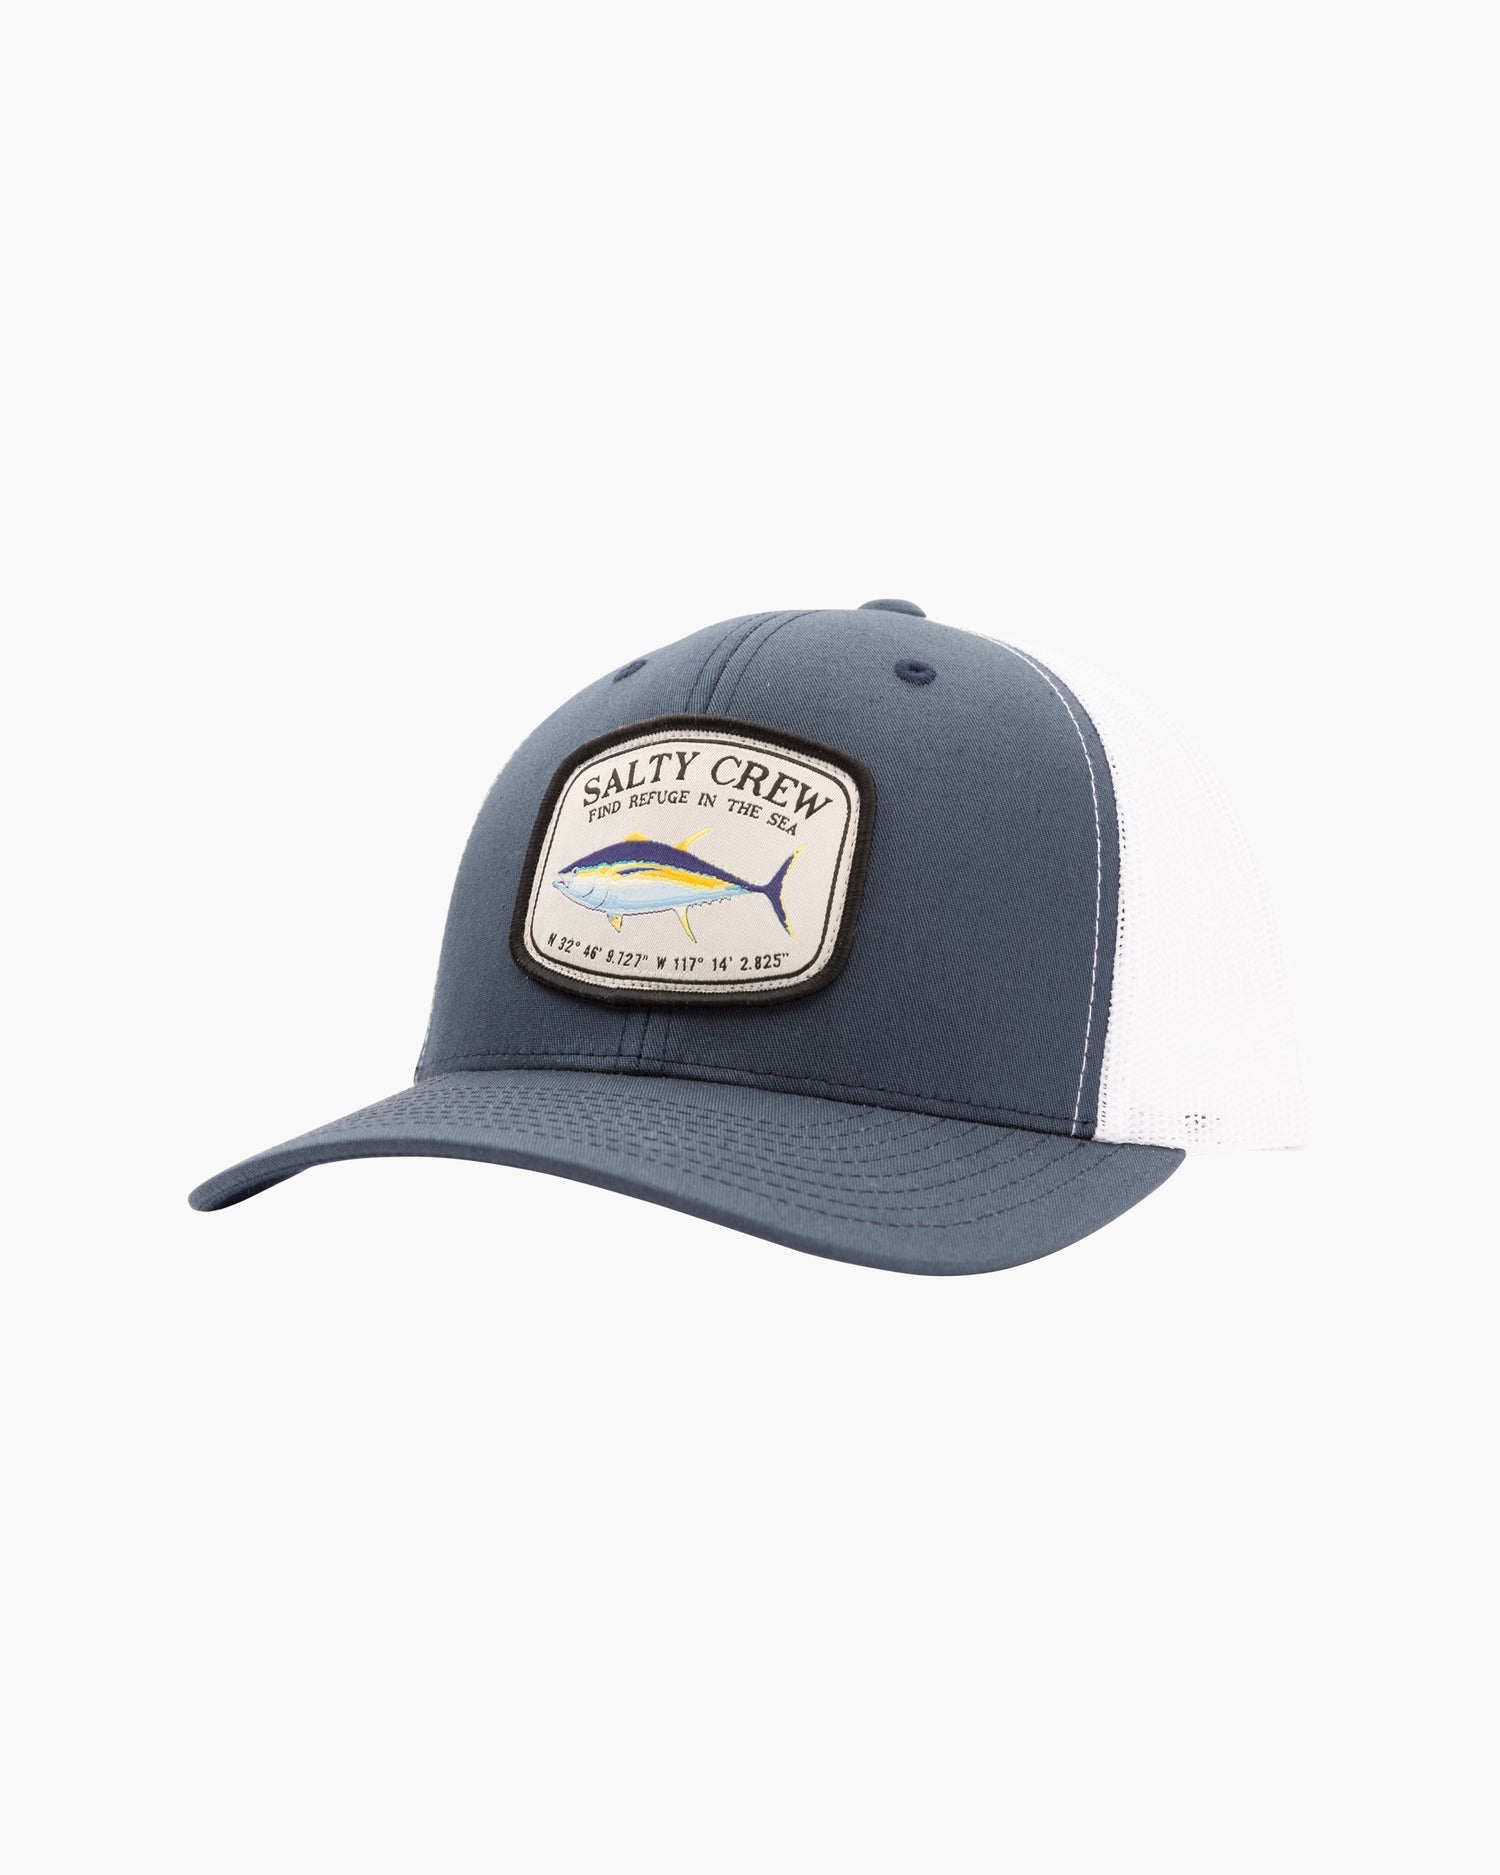 Off body front of Pacific Navy/White Retro Trucker